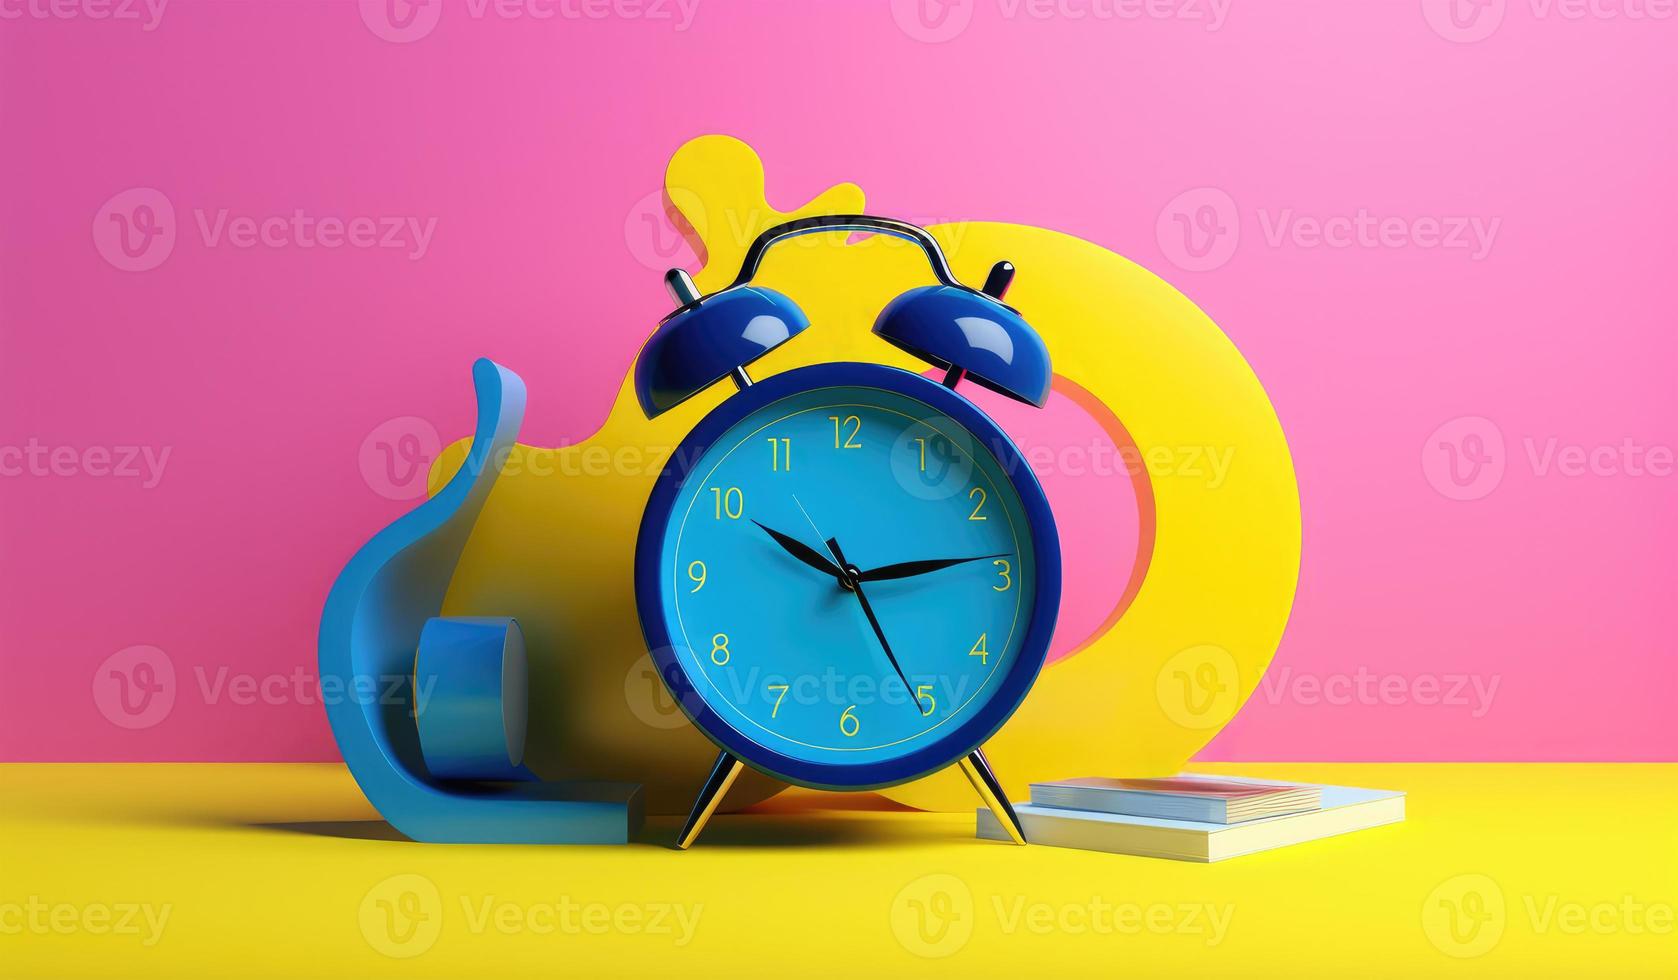 Alarm clock and book on yellow and pink background photo